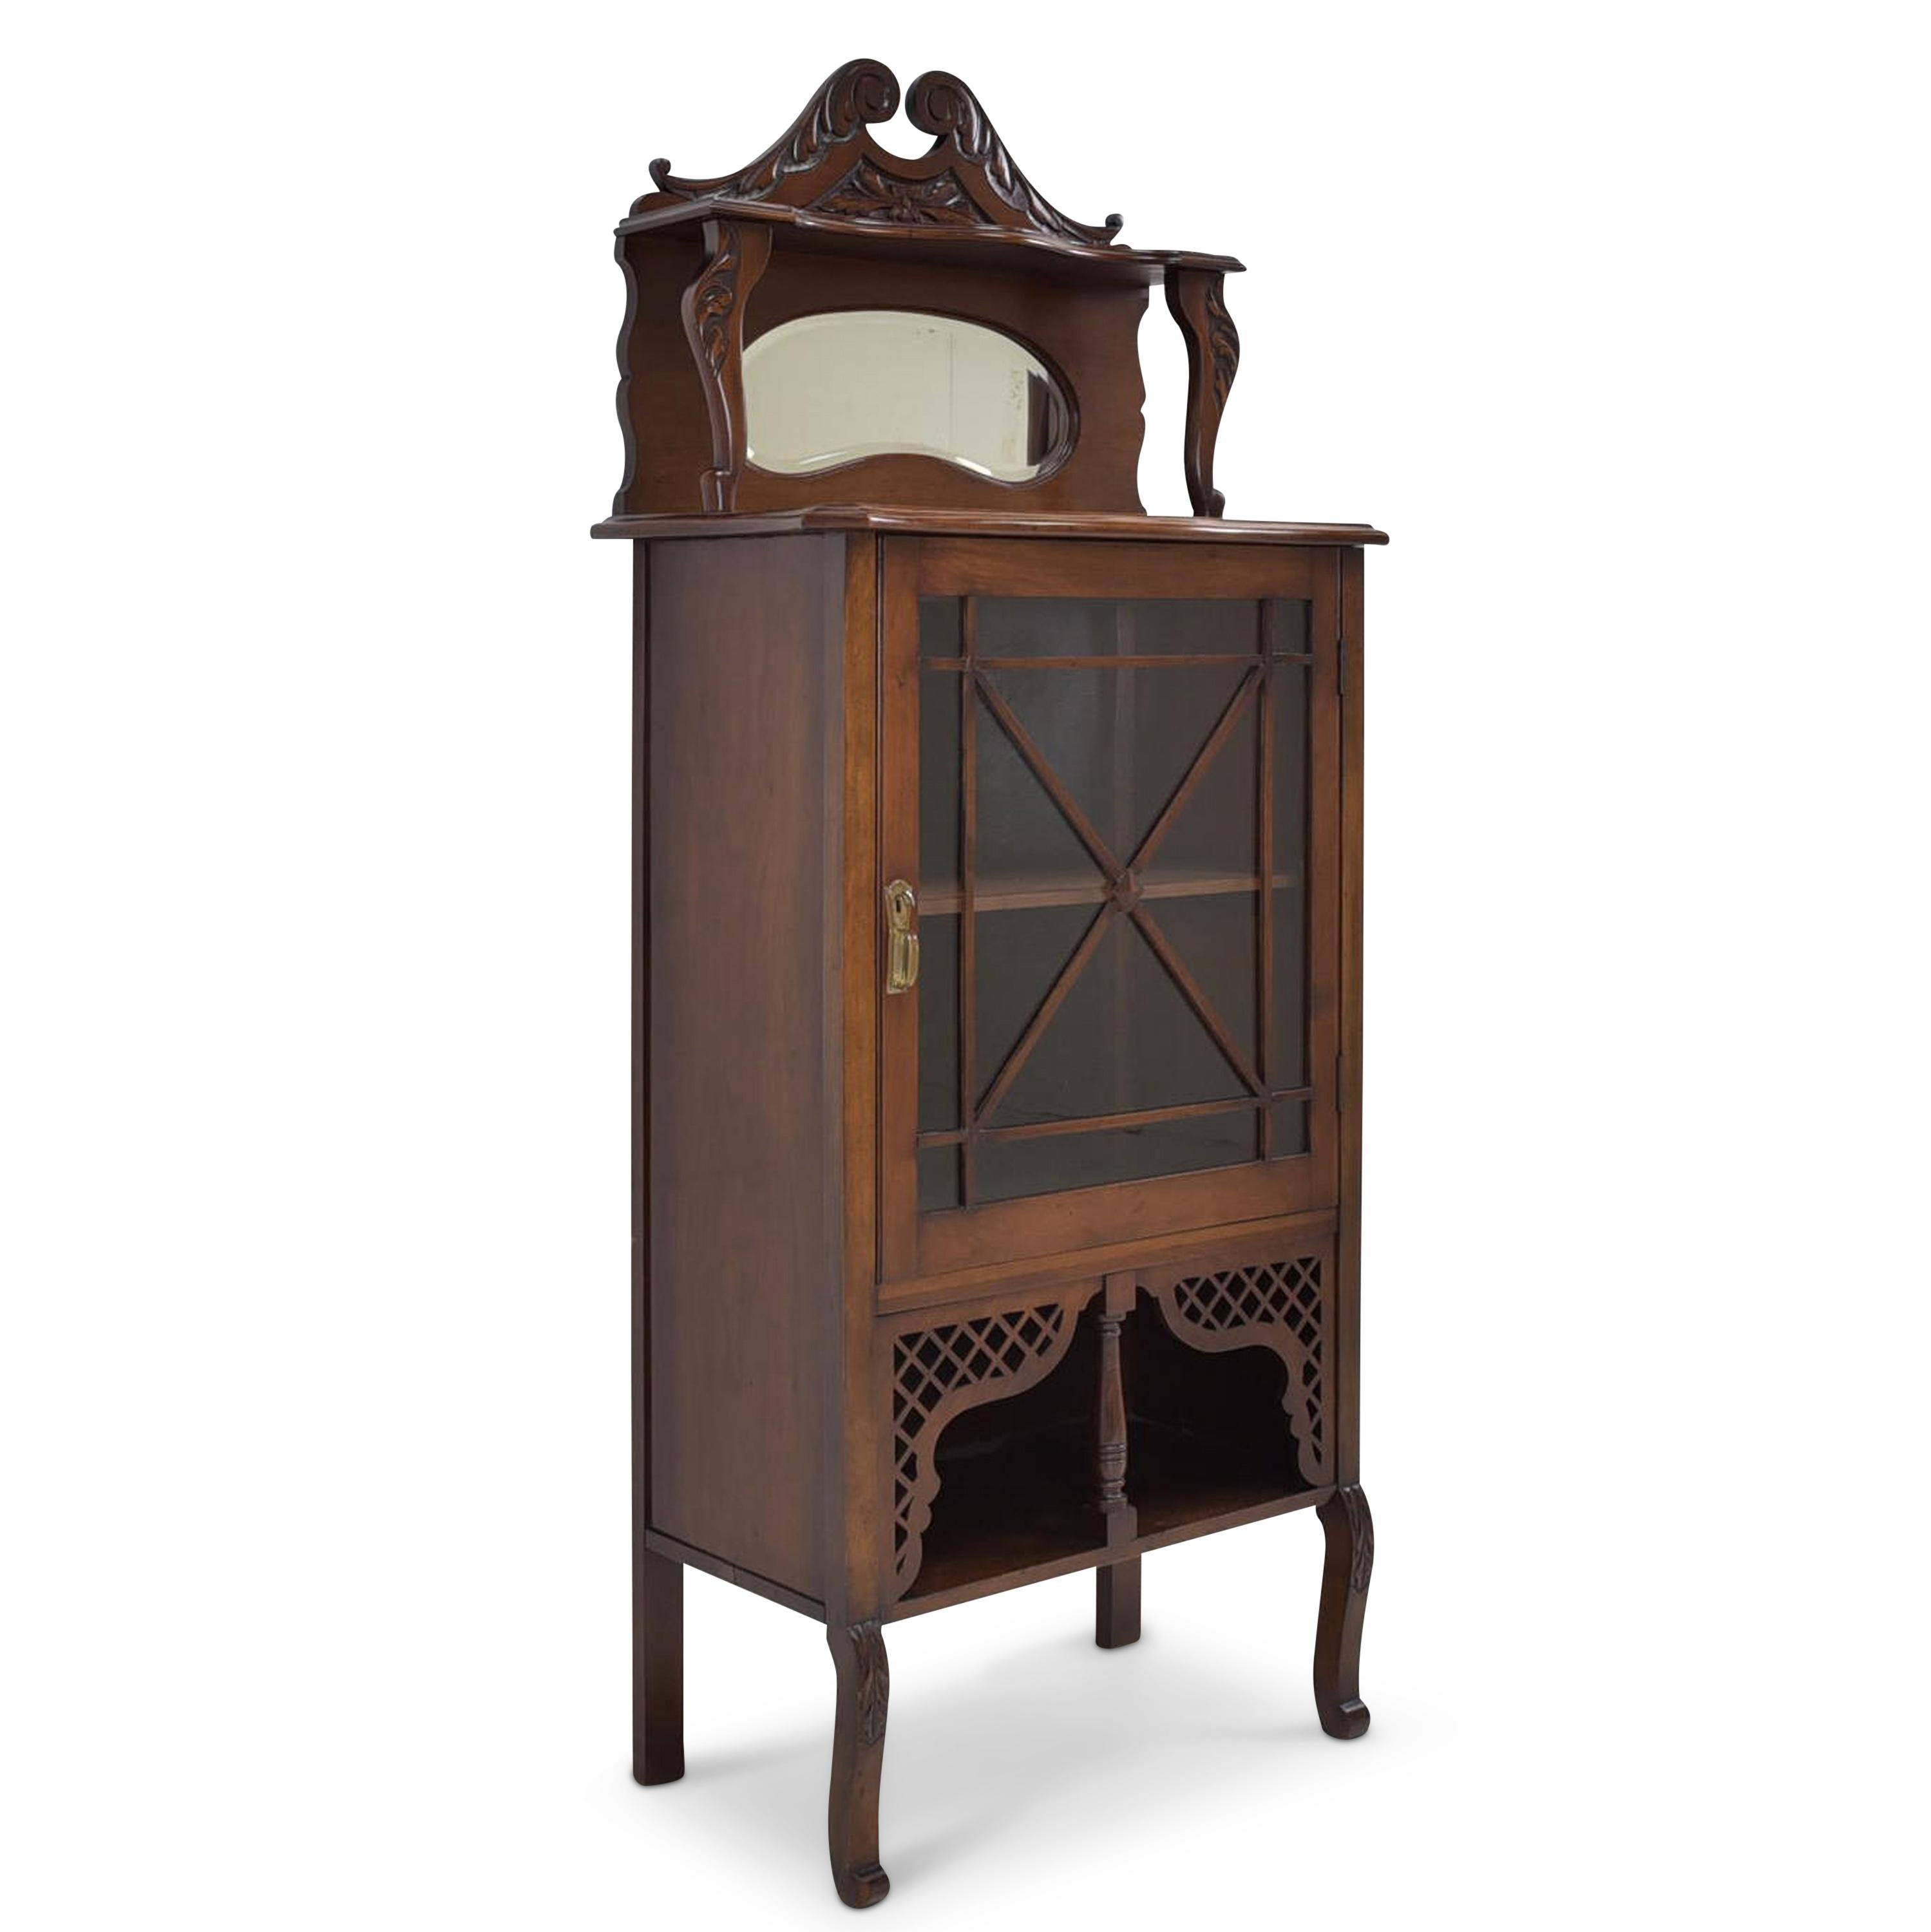 Small showcase restored Art Deco around 1930 walnut narrow

Features:
Mostly solid walnut
Single-door model with one shelf and open compartment, mirror and shelf on top
High quality
Beautiful carved decor and decorative elements
Original